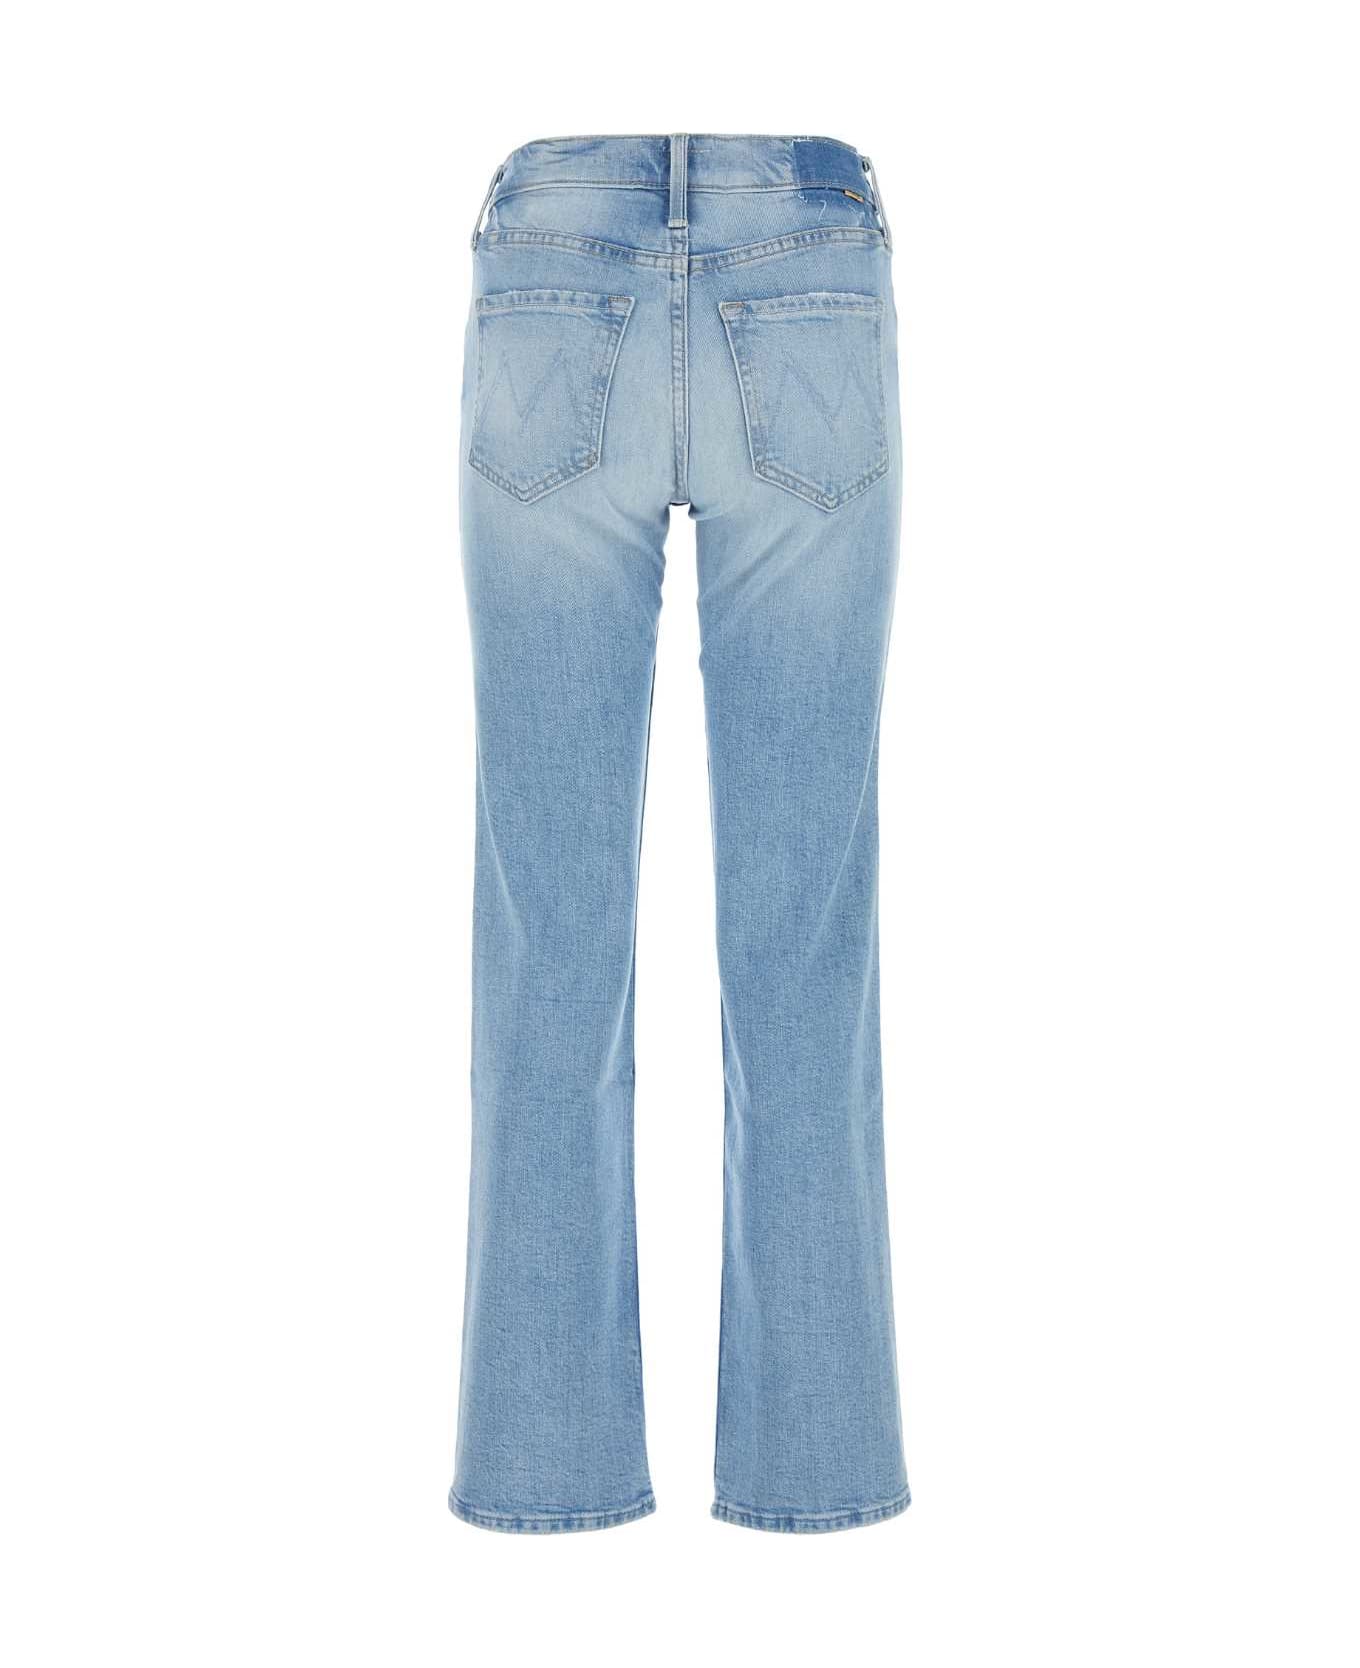 Mother Stretch Denim The Smarty Pants Jeans - AZZURRO